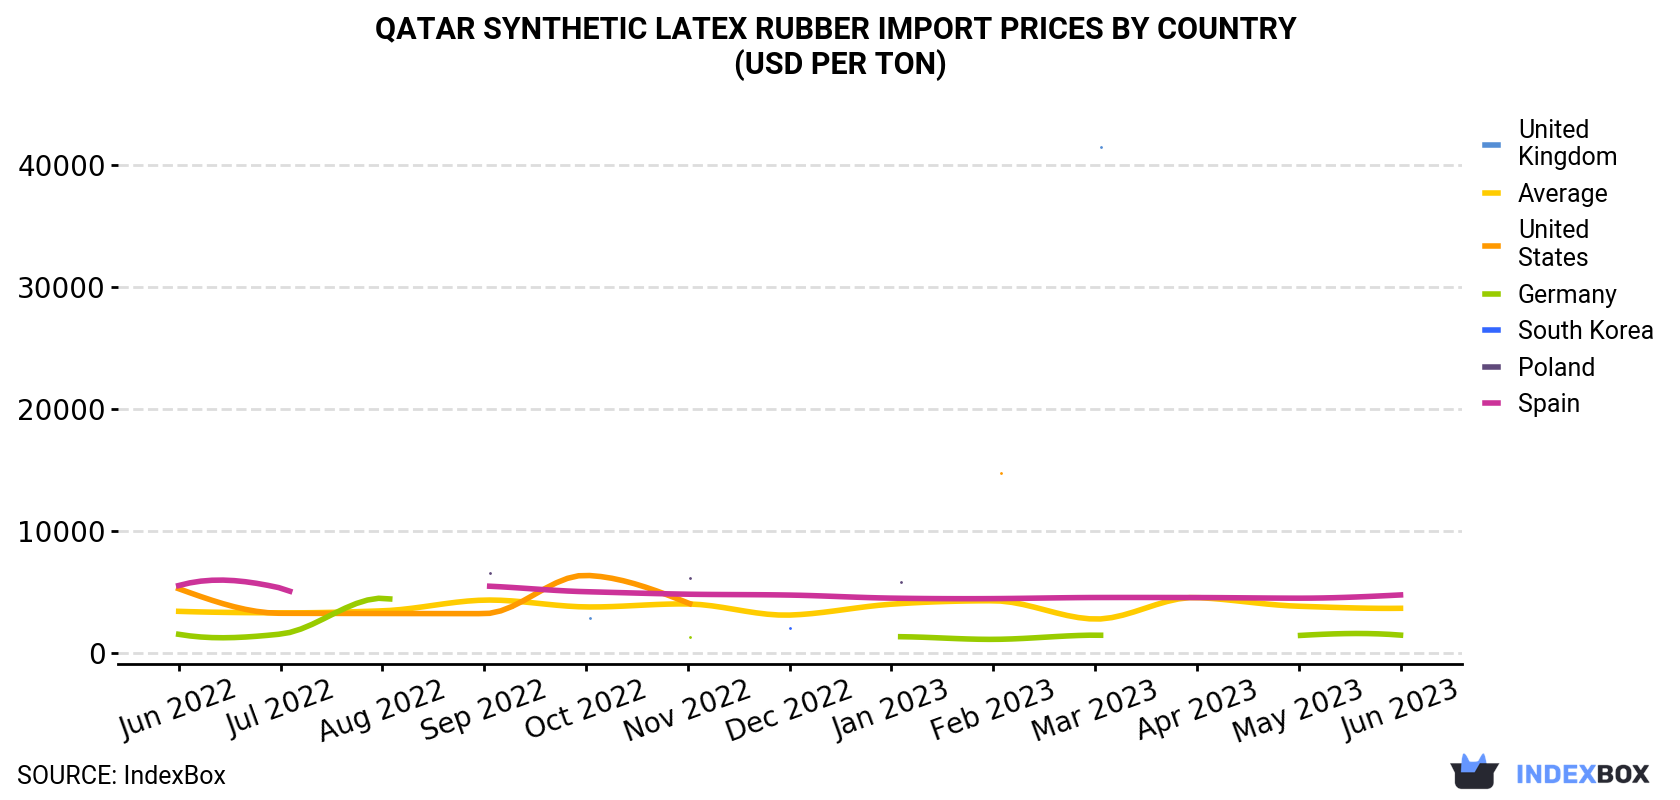 Qatar Synthetic Latex Rubber Import Prices By Country (USD Per Ton)